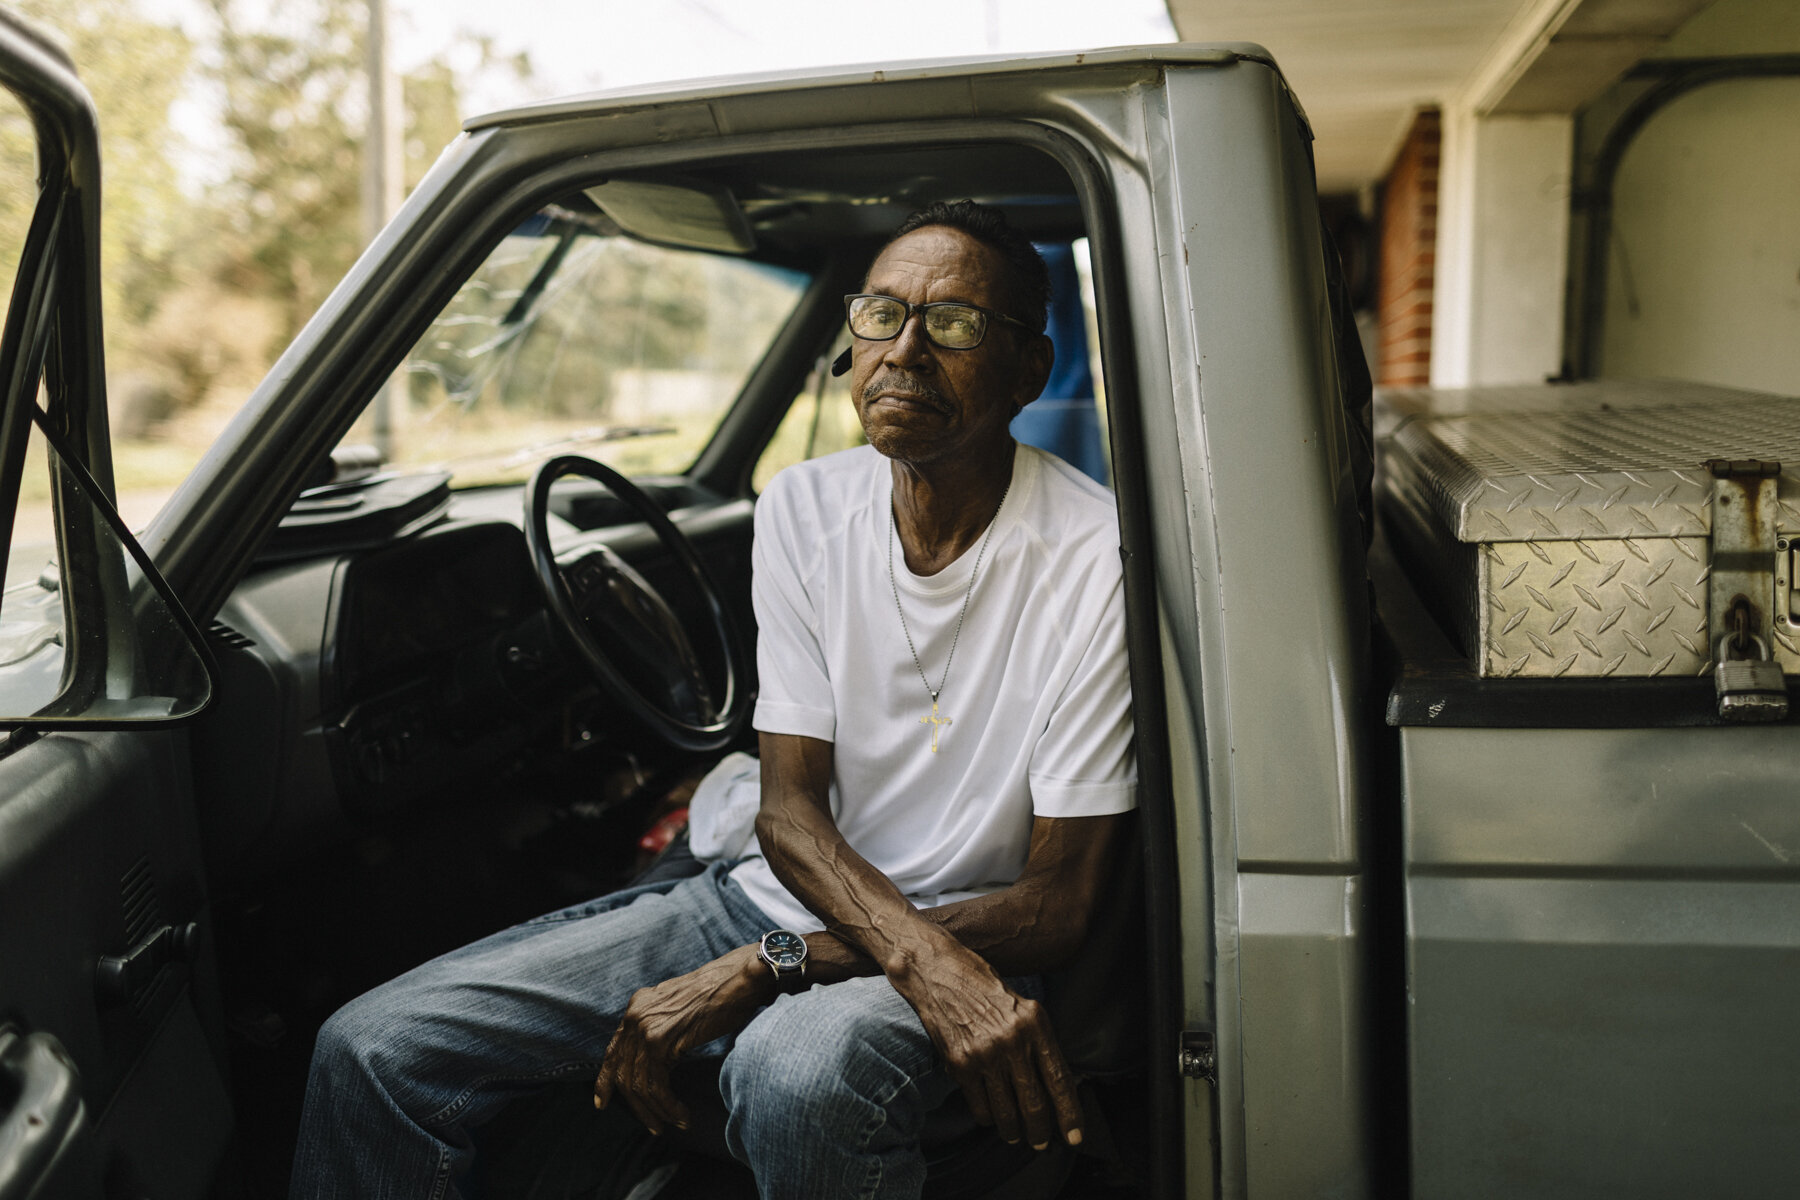  NYTSTORM - Lake Charles, LA - Oct. 11, 2020 - Lester Rubit sits in his truck, which was smashed by a collapsed hotel walkway during Hurricane Laura. Lake Charles was hit hard by Hurricane Laura earlier this fall, and barely had a chance to begin the